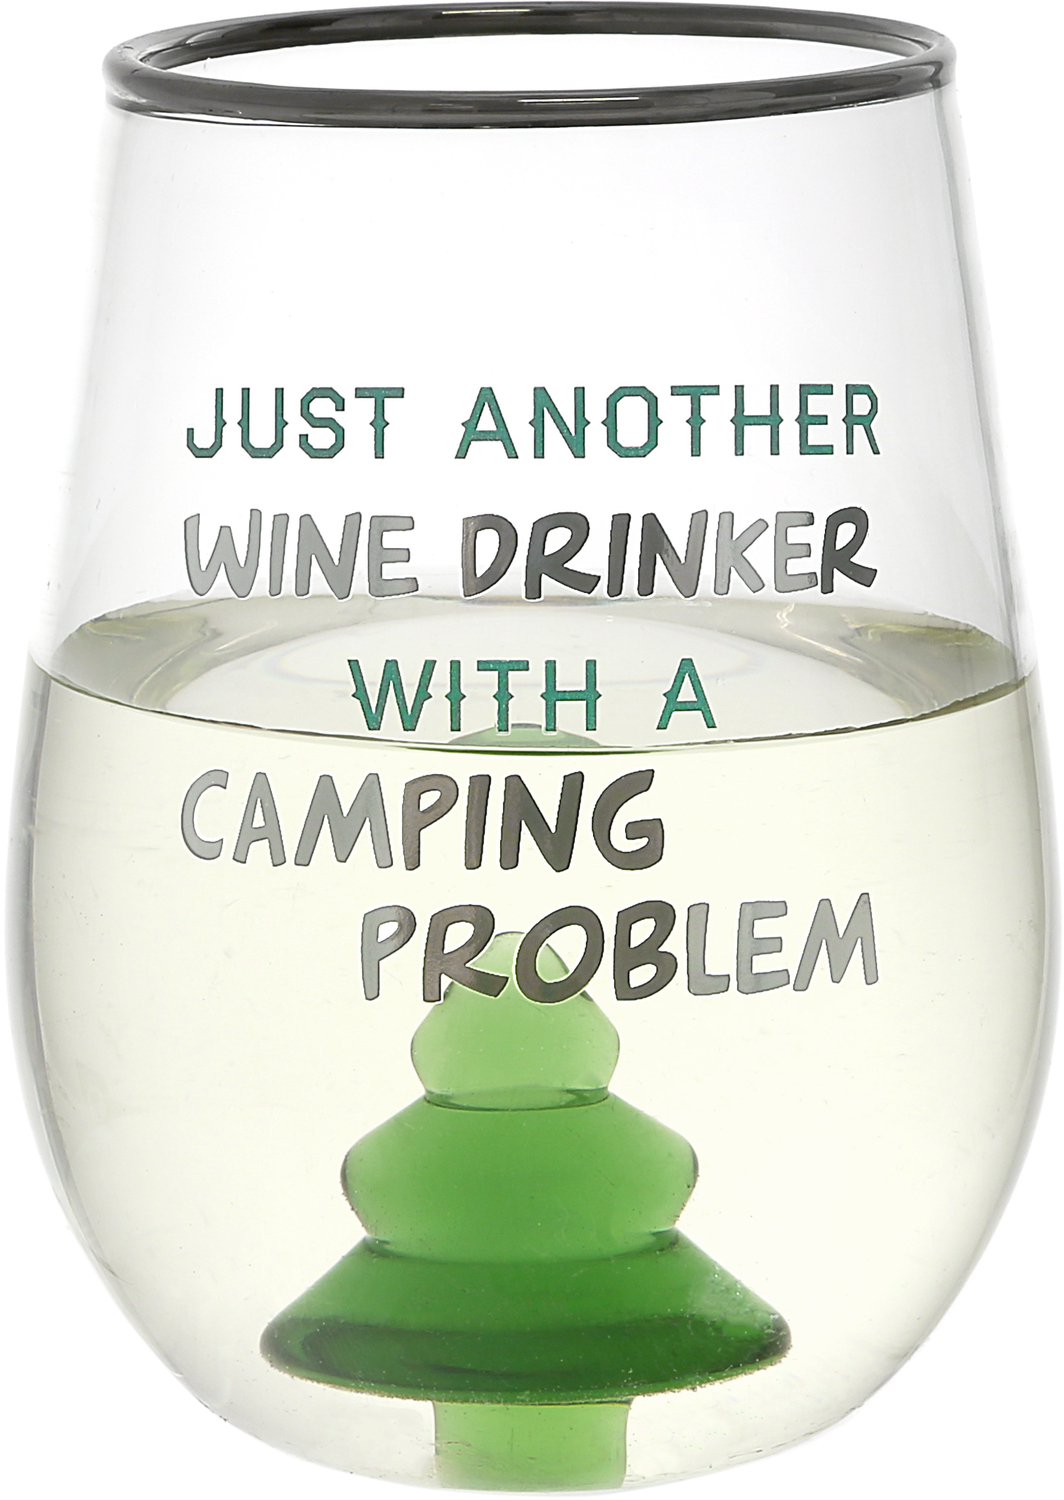 Camping Problem - Pine Tree by We People - Camping Problem - Pine Tree - 19 oz. Stemless Wine Glass with 3-D Figurine